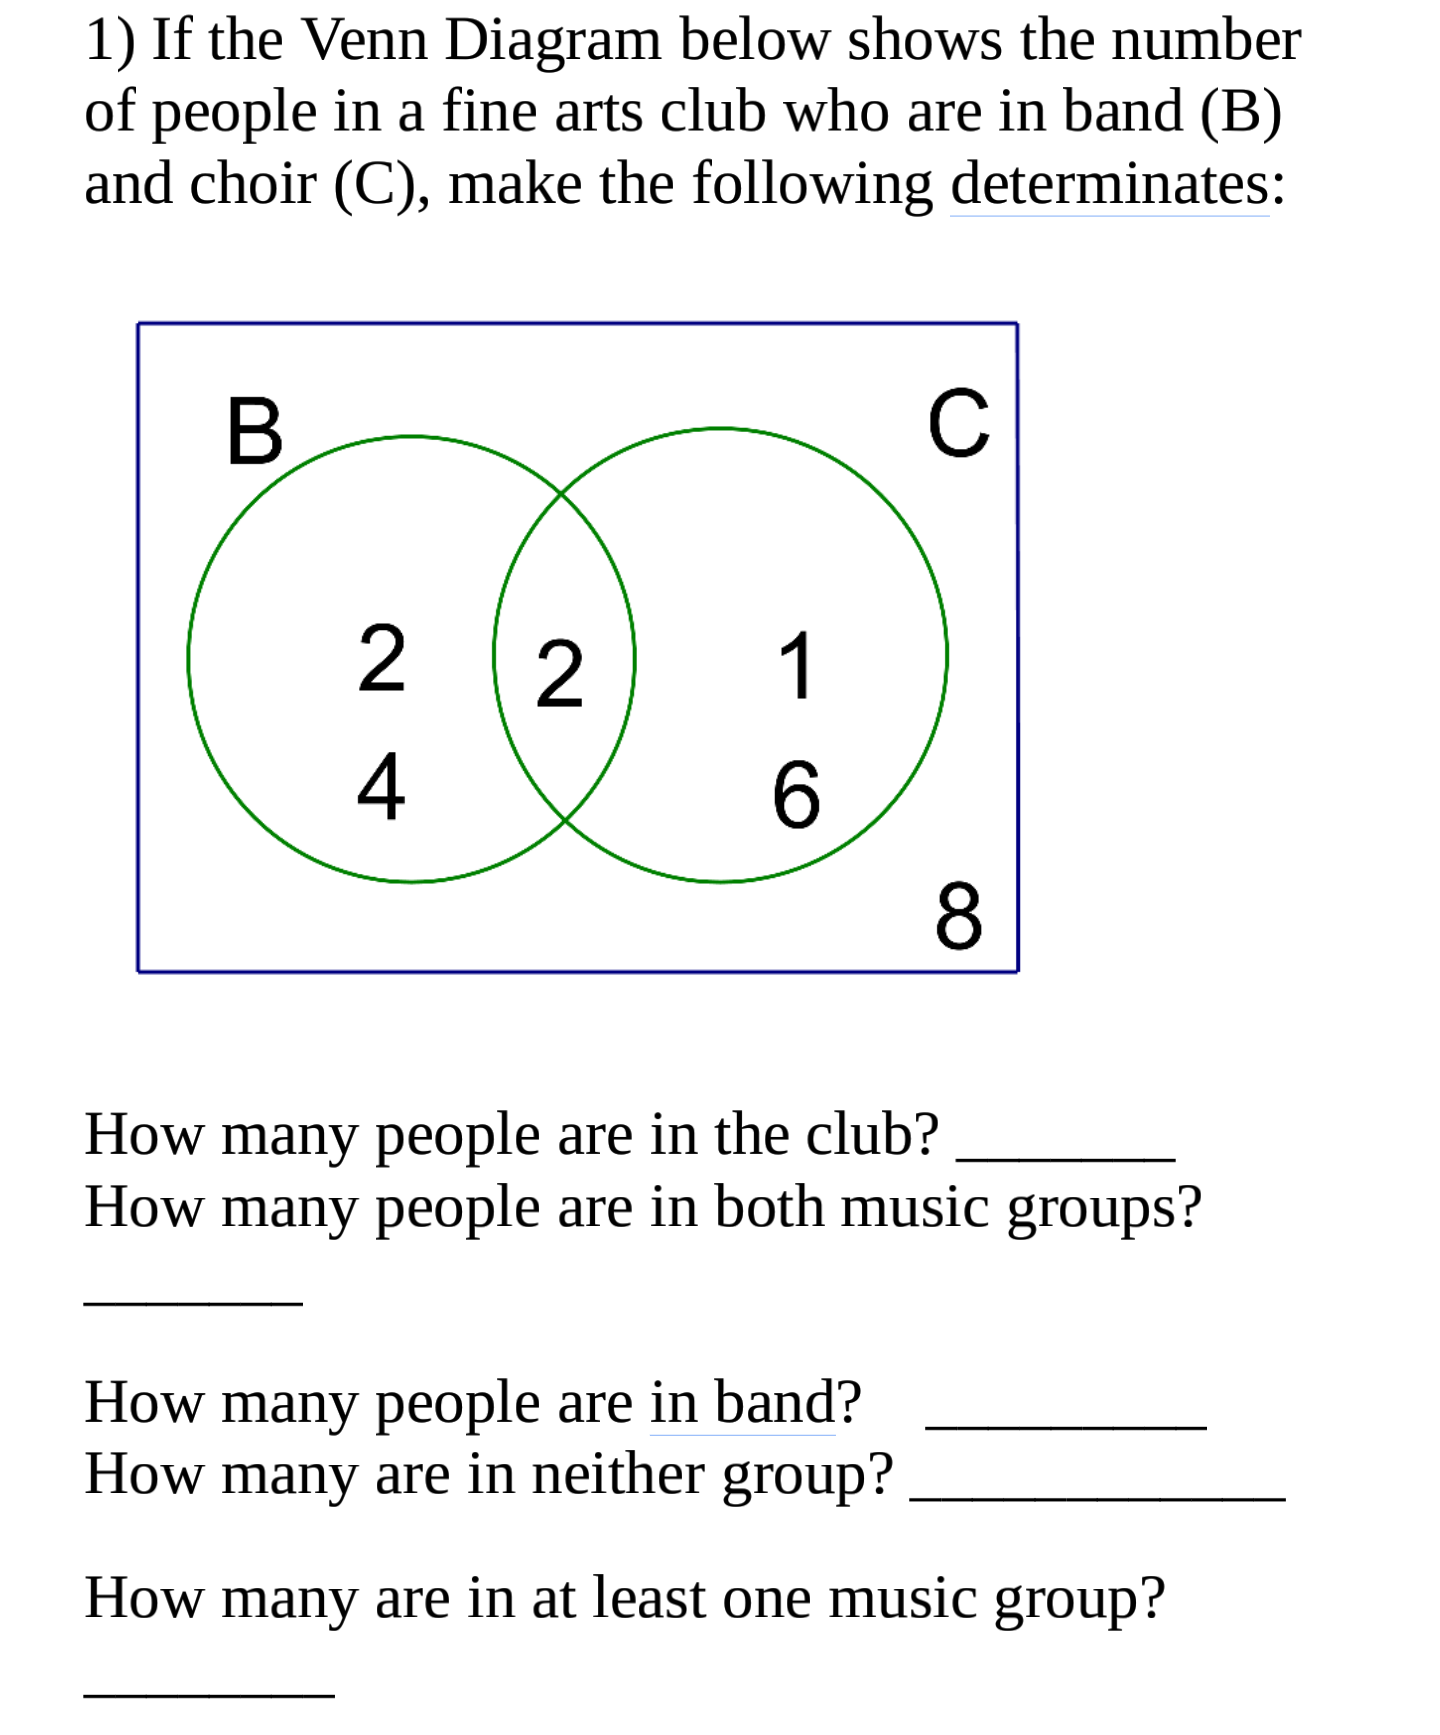 1) If the Venn Diagram below shows the number
of people in a fine arts club who are in band (B)
and choir (C), make the following determinates:
C
2
1
4
6.
8
How many people are in the club?
How many people are in both music groups?
How many people are in band?
How many are in neither group?
How many are in at least one music group?
B
